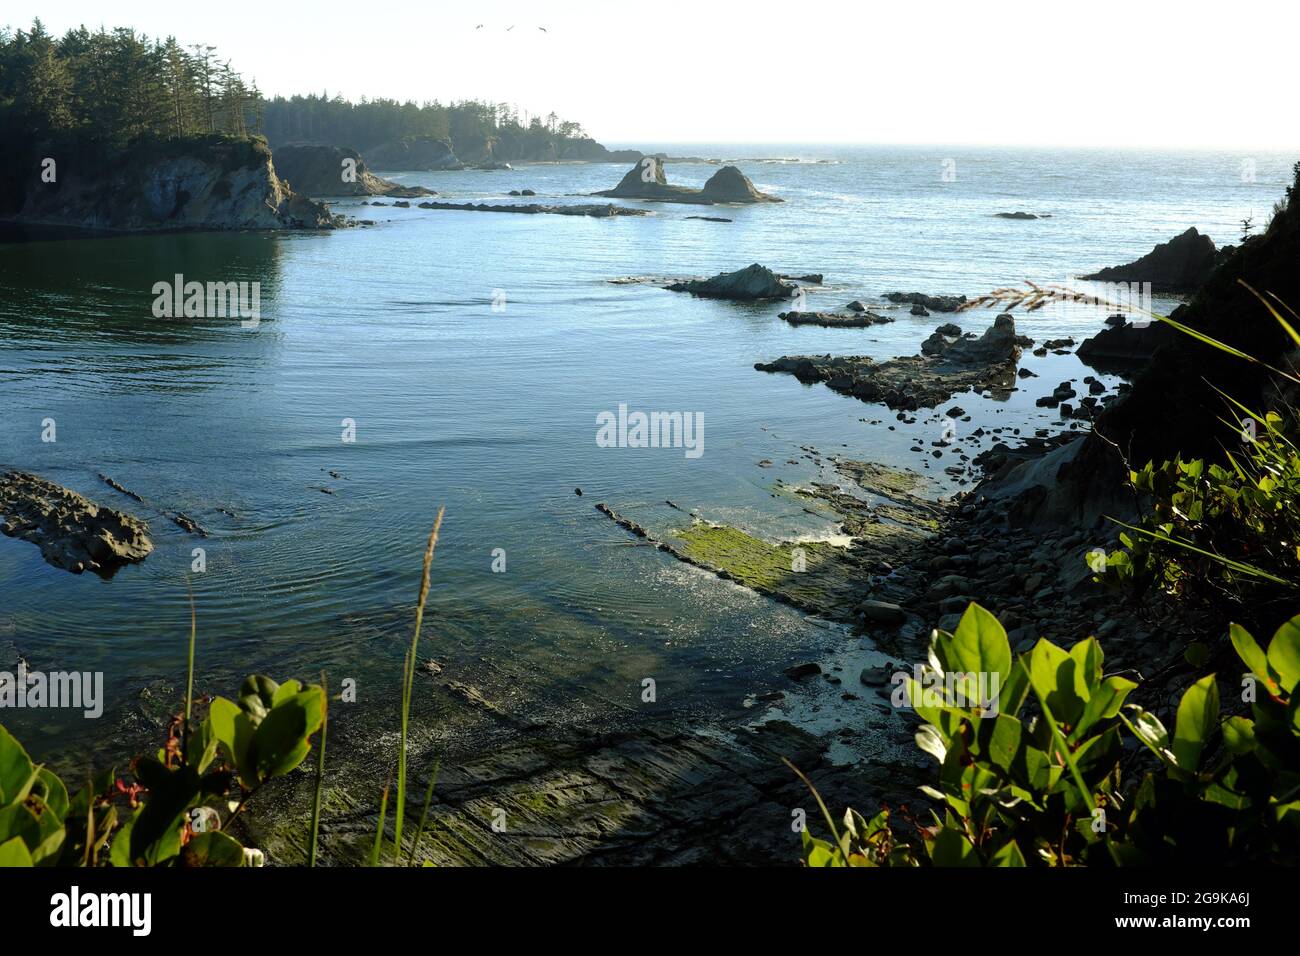 The calm waters of Sunset Bay State Park on Cape Arago, Oregon. Stock Photo